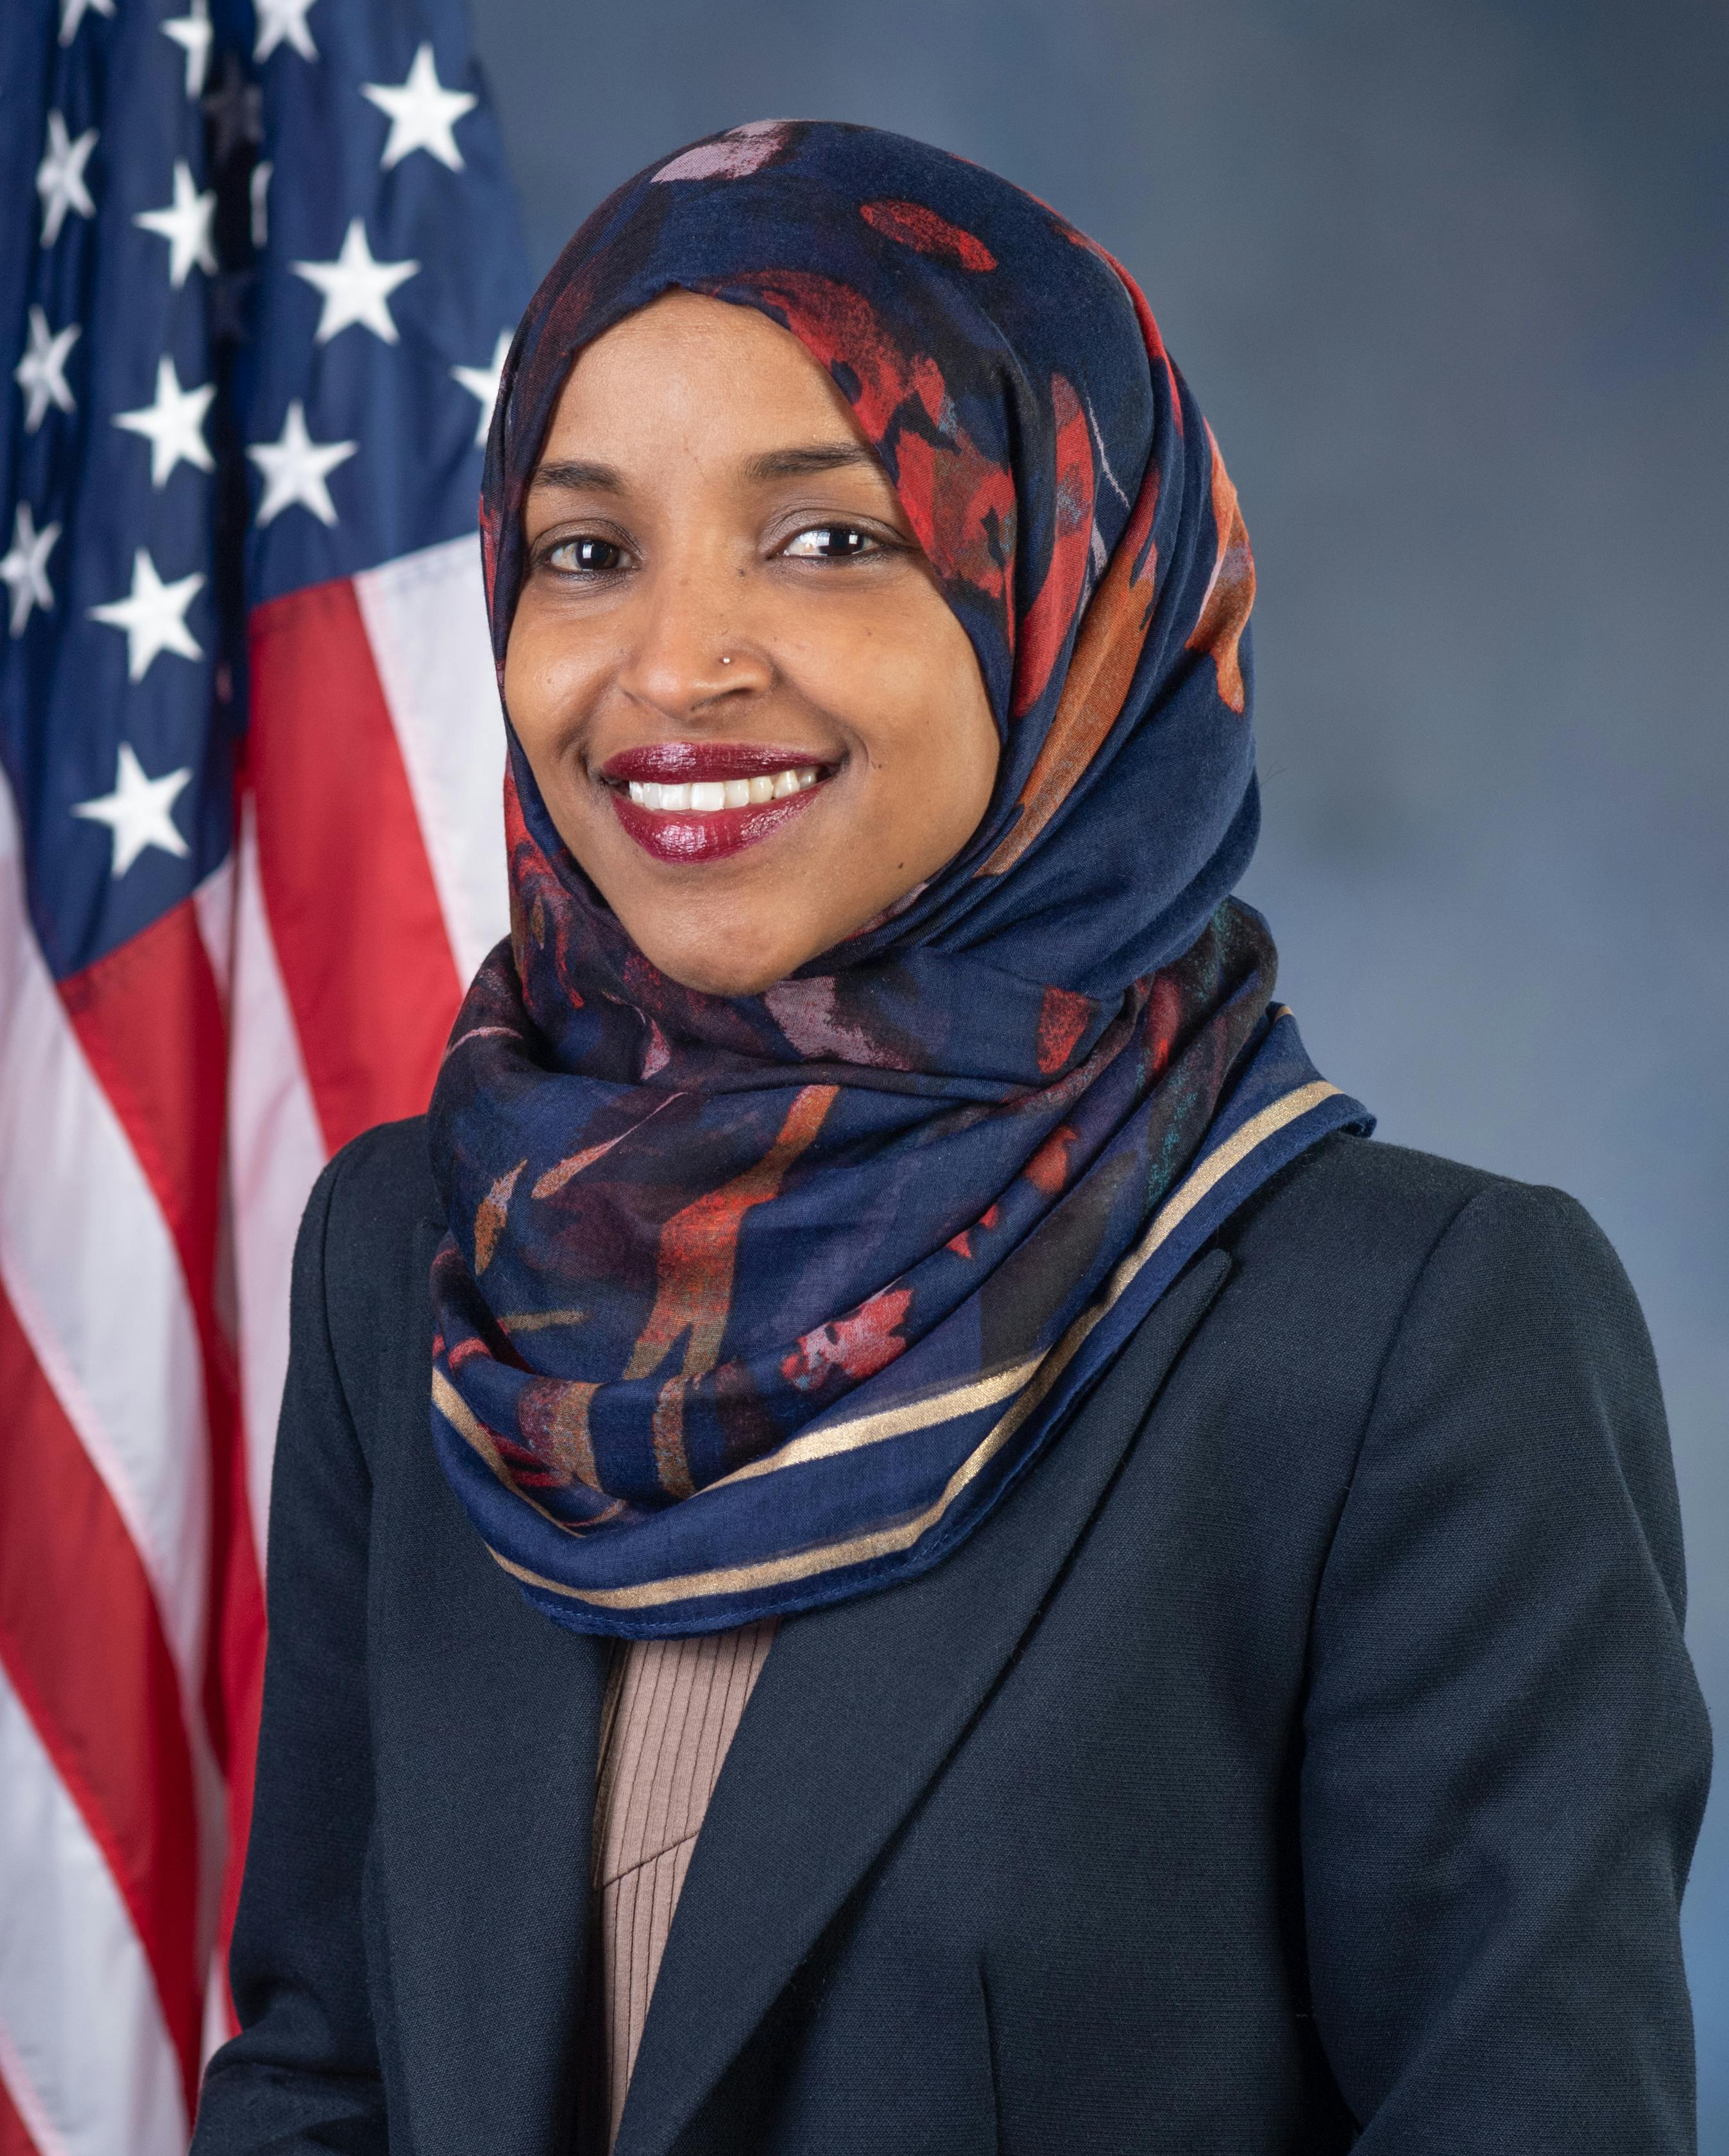 Profile picture of Ilhan Omar